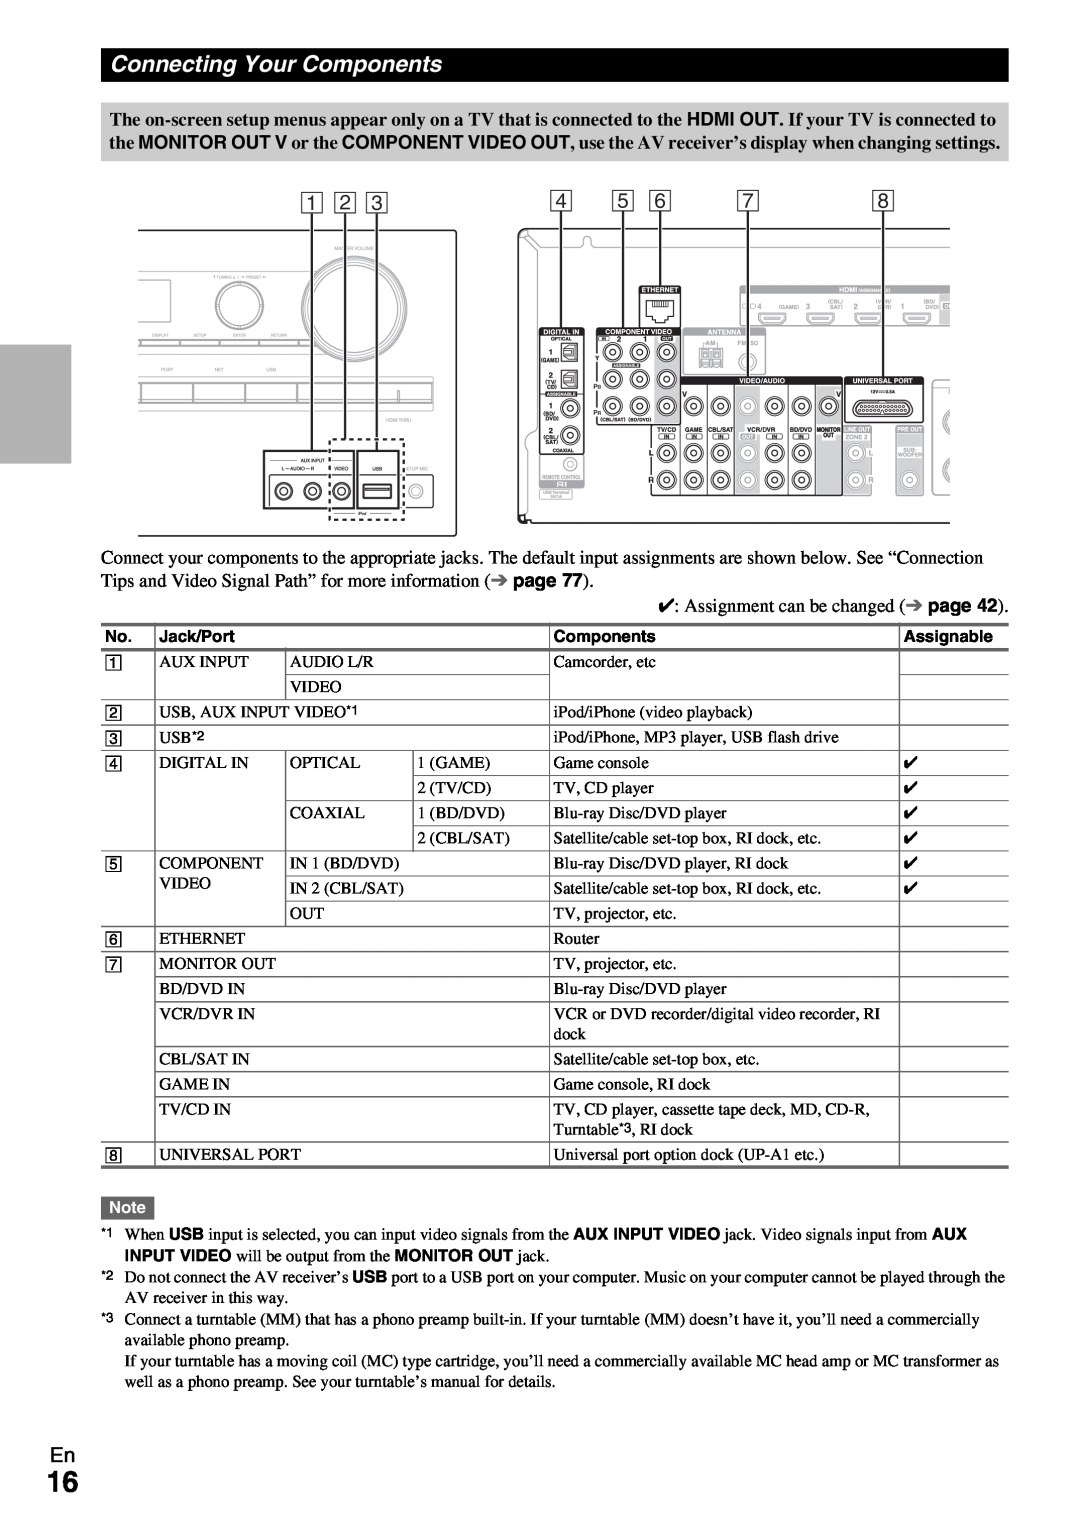 Onkyo TX-NR579 instruction manual Connecting Your Components, A B C D E F G H 